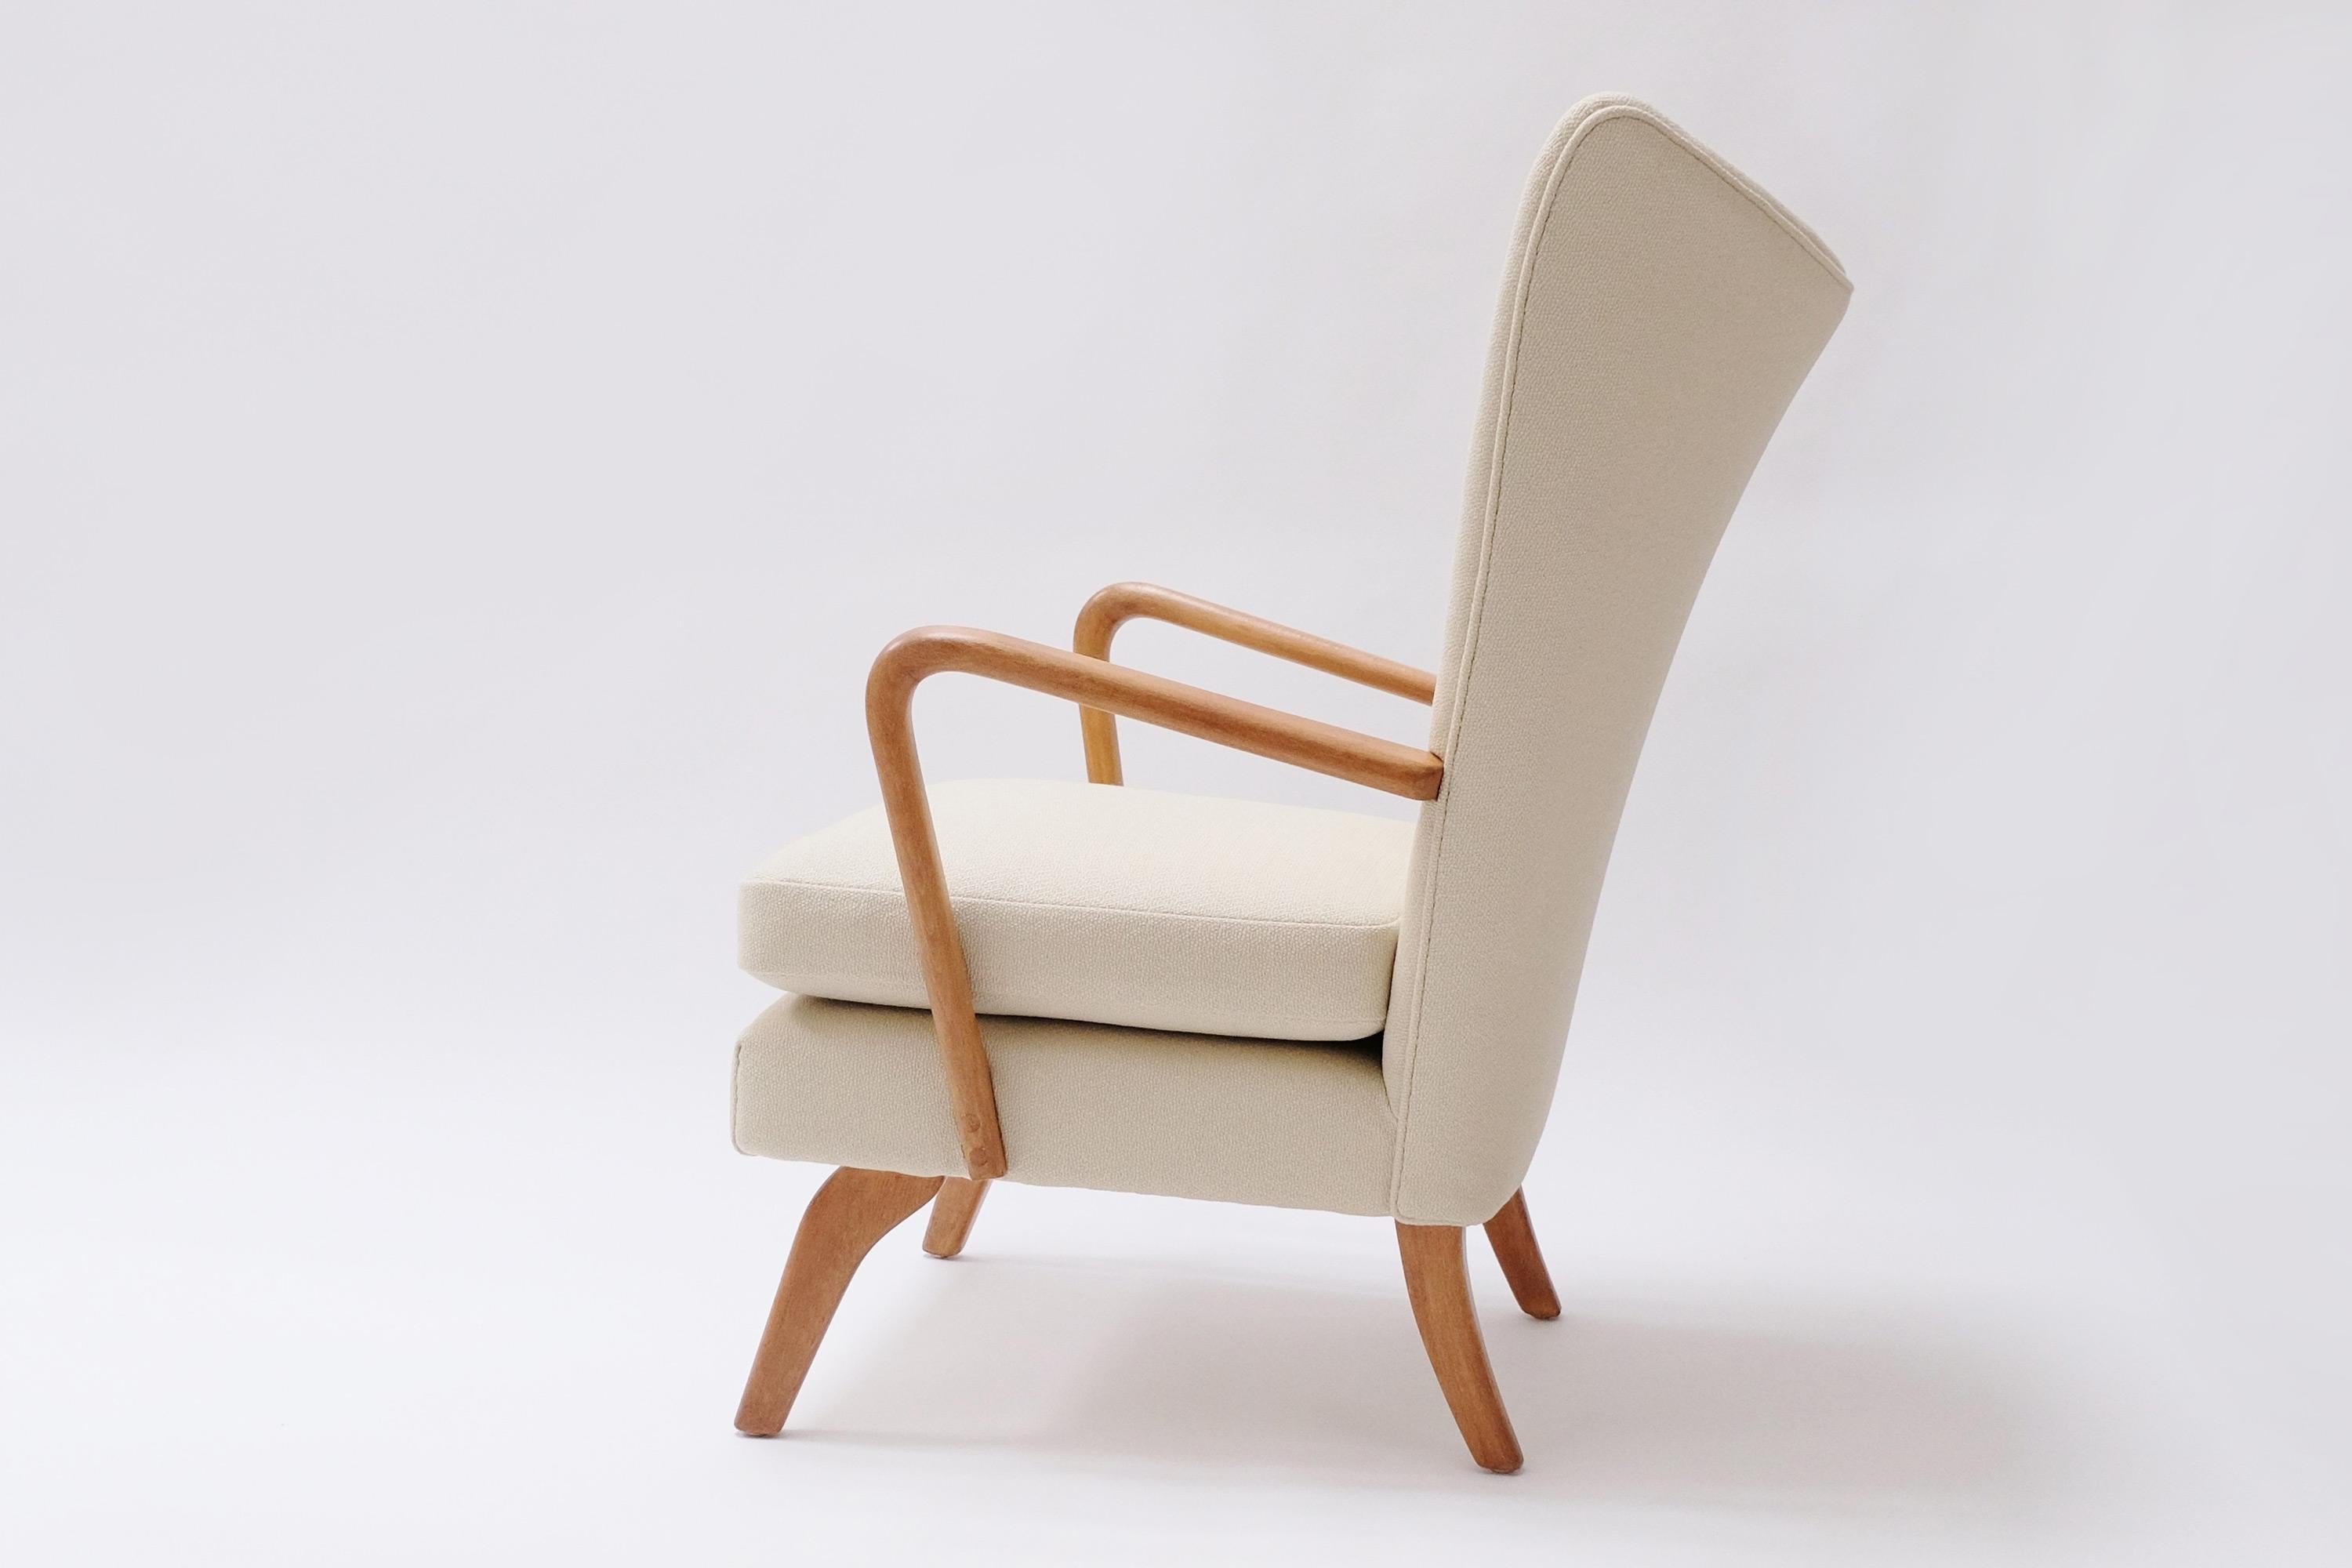 Wool Mid-Century Bambino Wingback Armchair by Howard Keith, 1950s, England For Sale